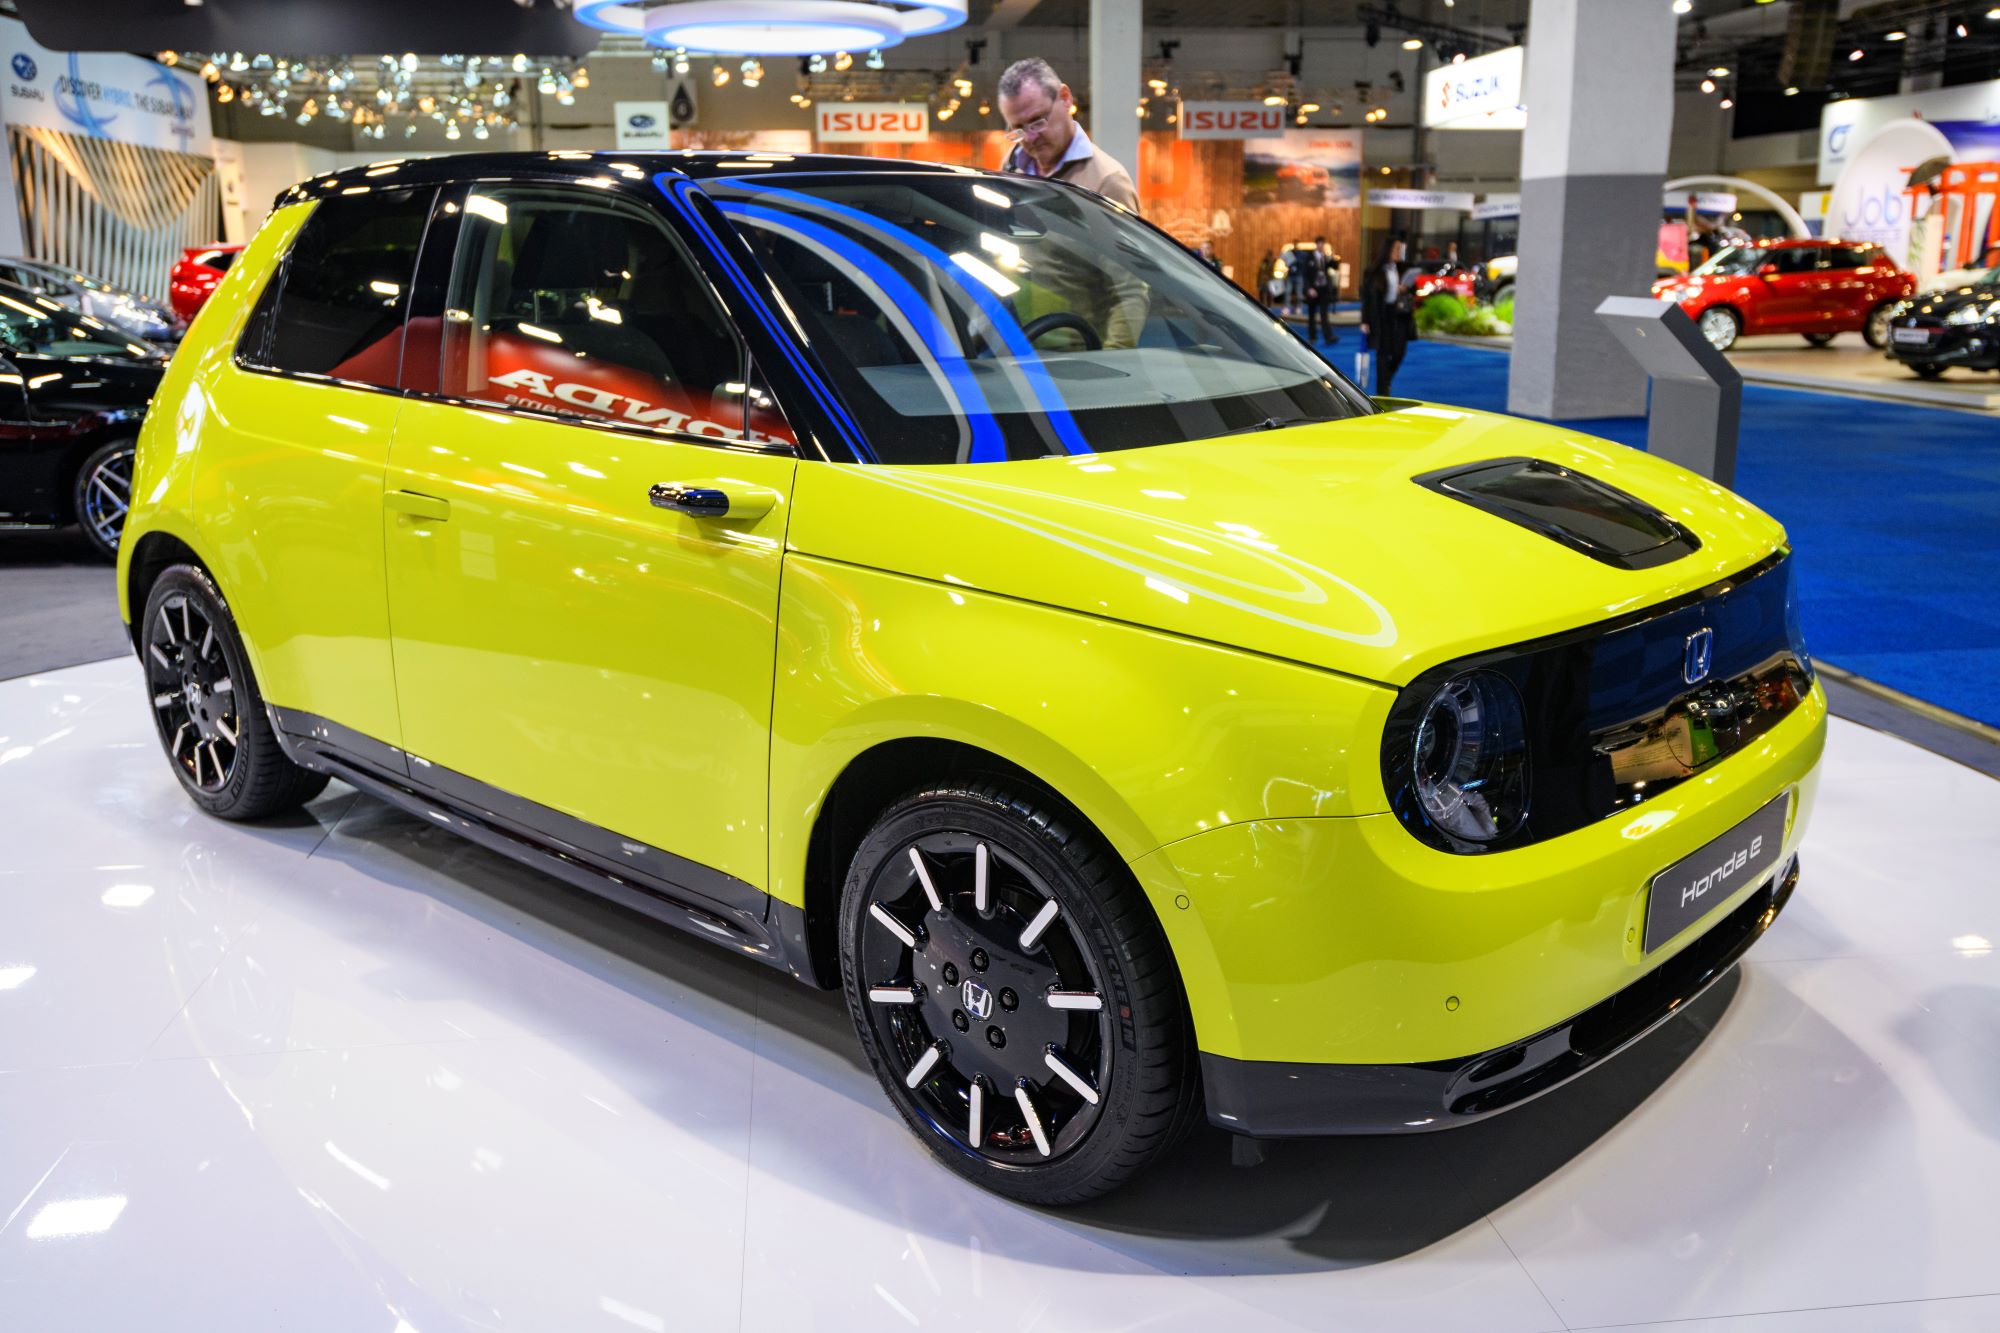 A yellow Honda e model on display at the Brussels Expo